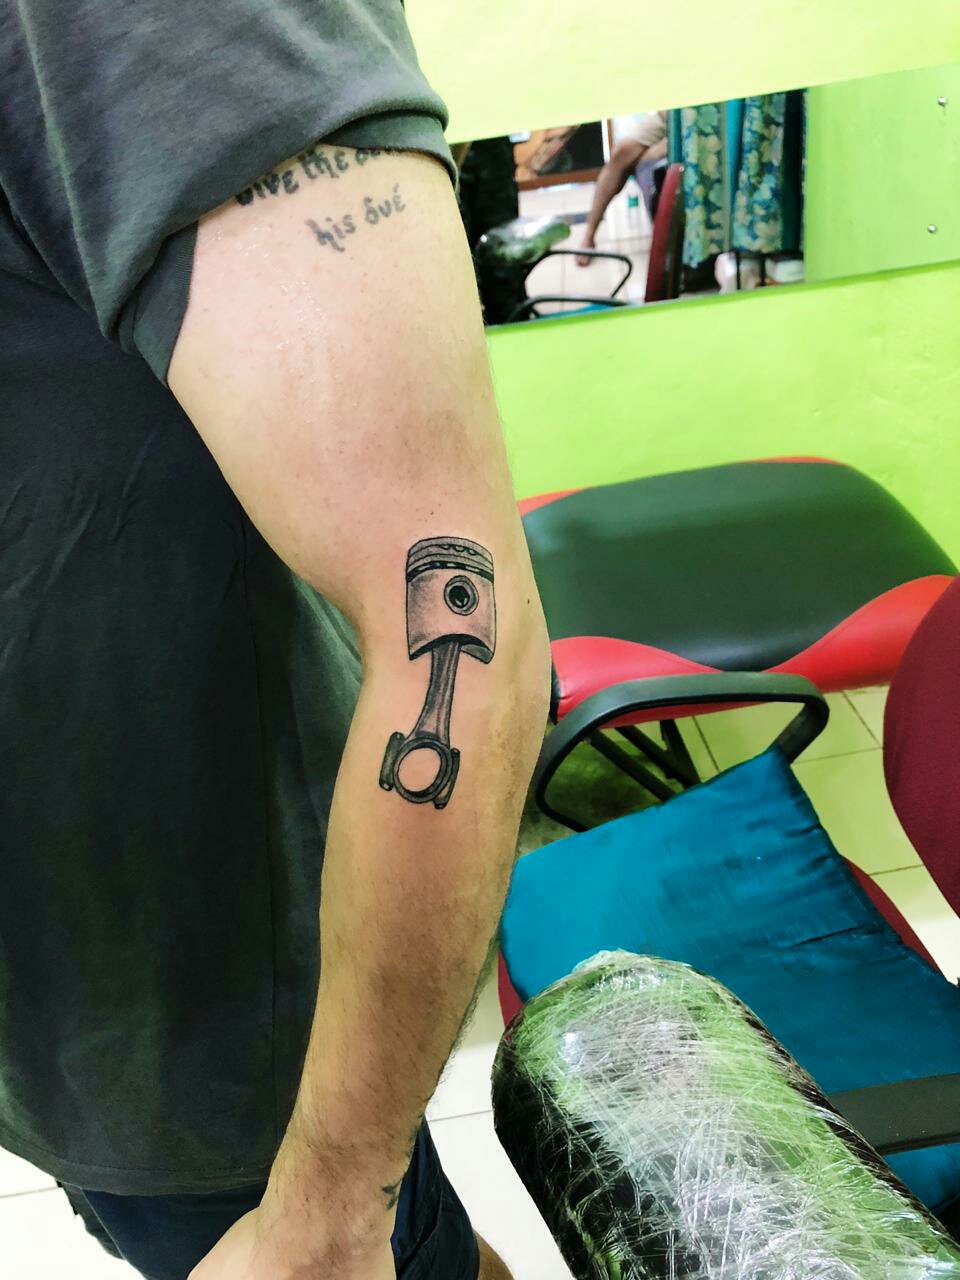 Can someone help me figure out what I'm looking at? : r/shittytattoos